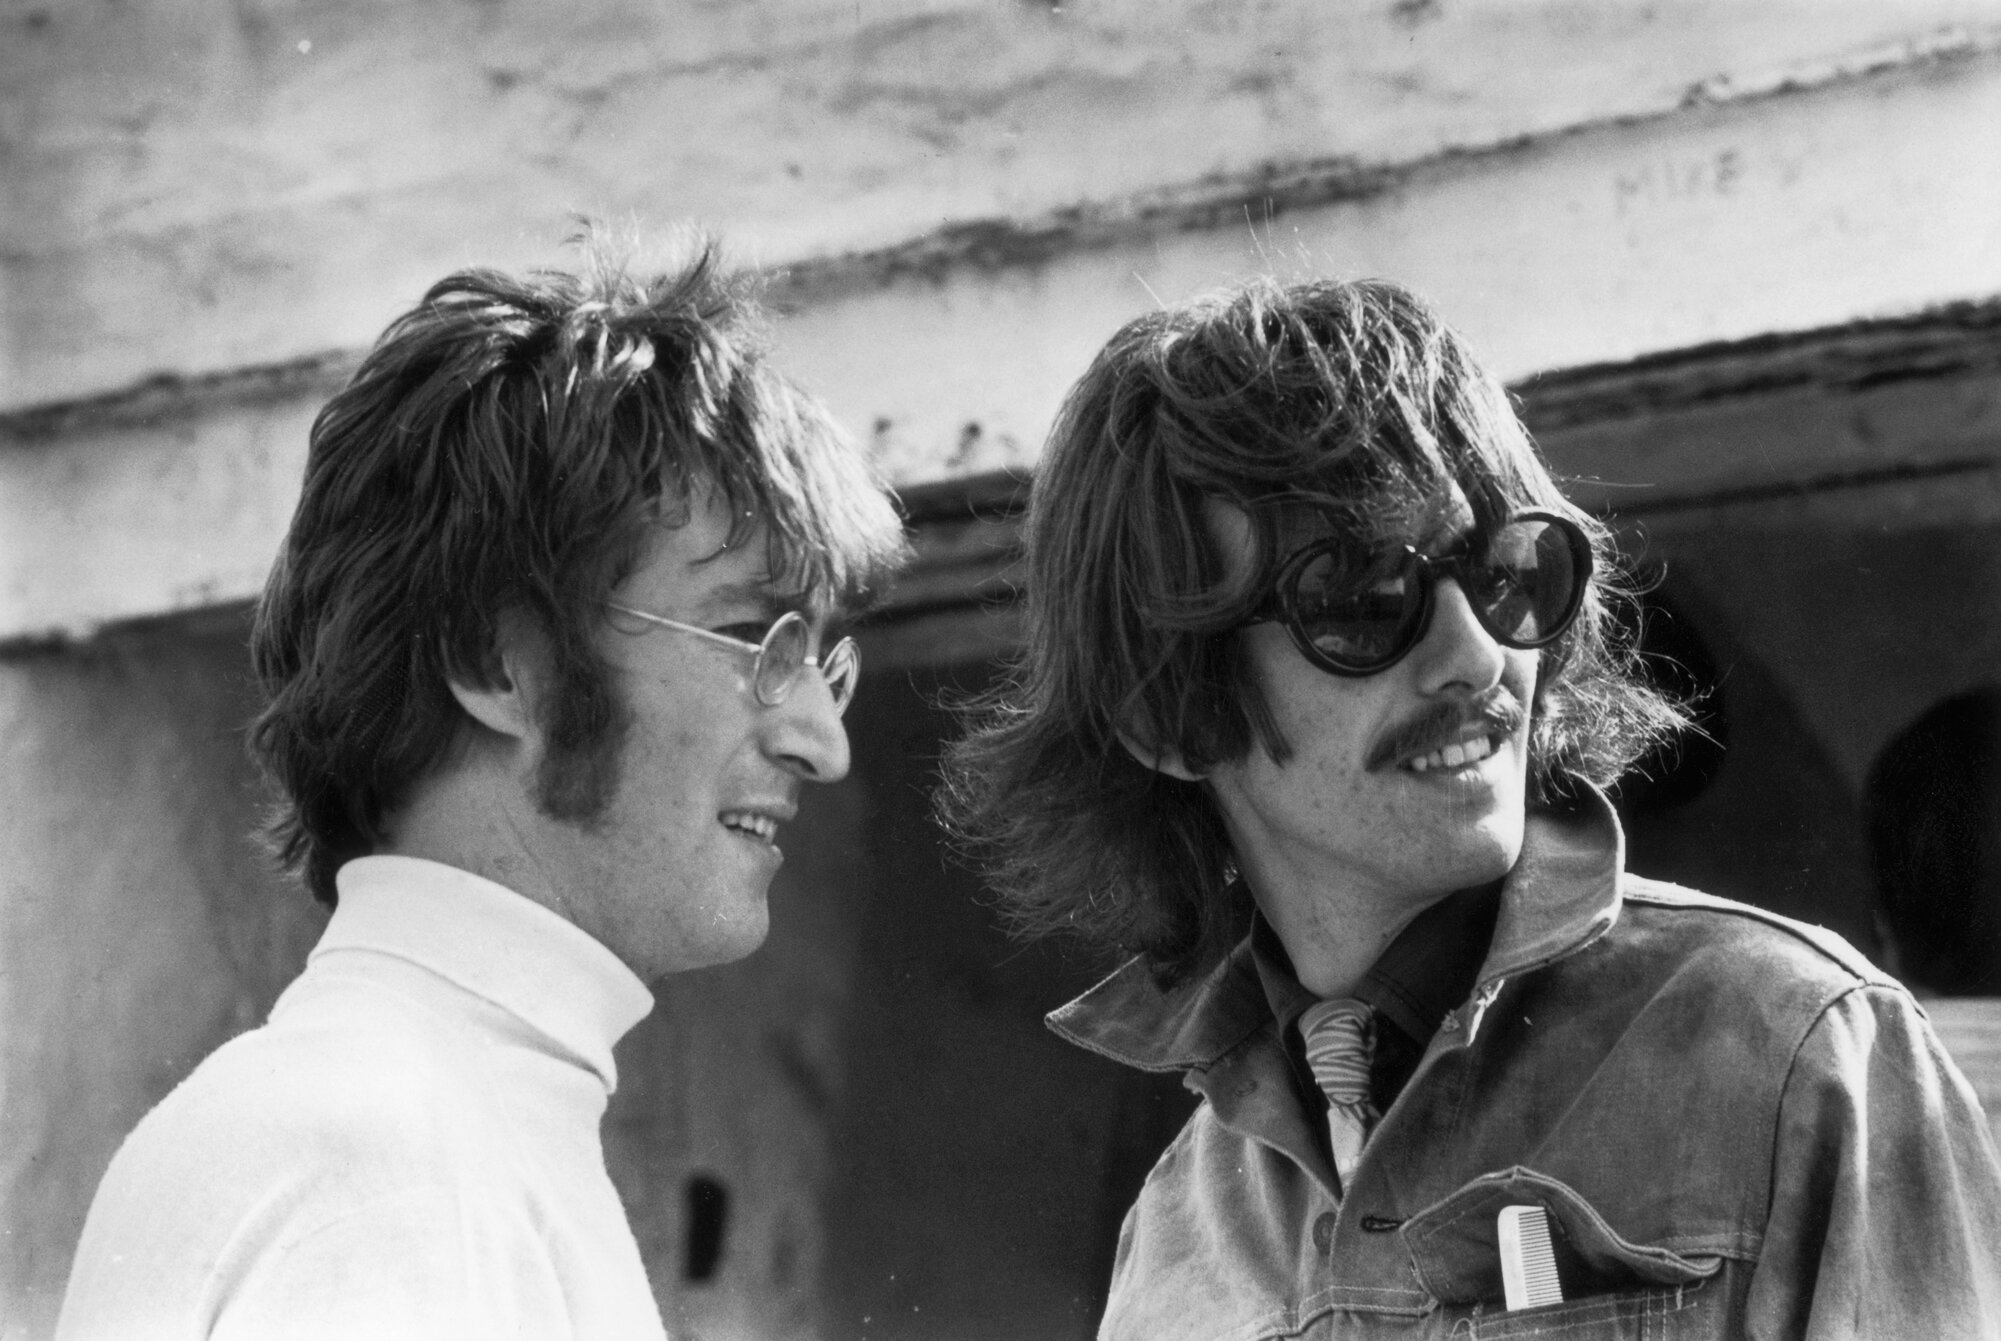 Beatles John Lennon (1940 - 1980) and George Harrison (1943 - 2001) in Newquay while filming 'The Magical Mystery Tour' in 1967.